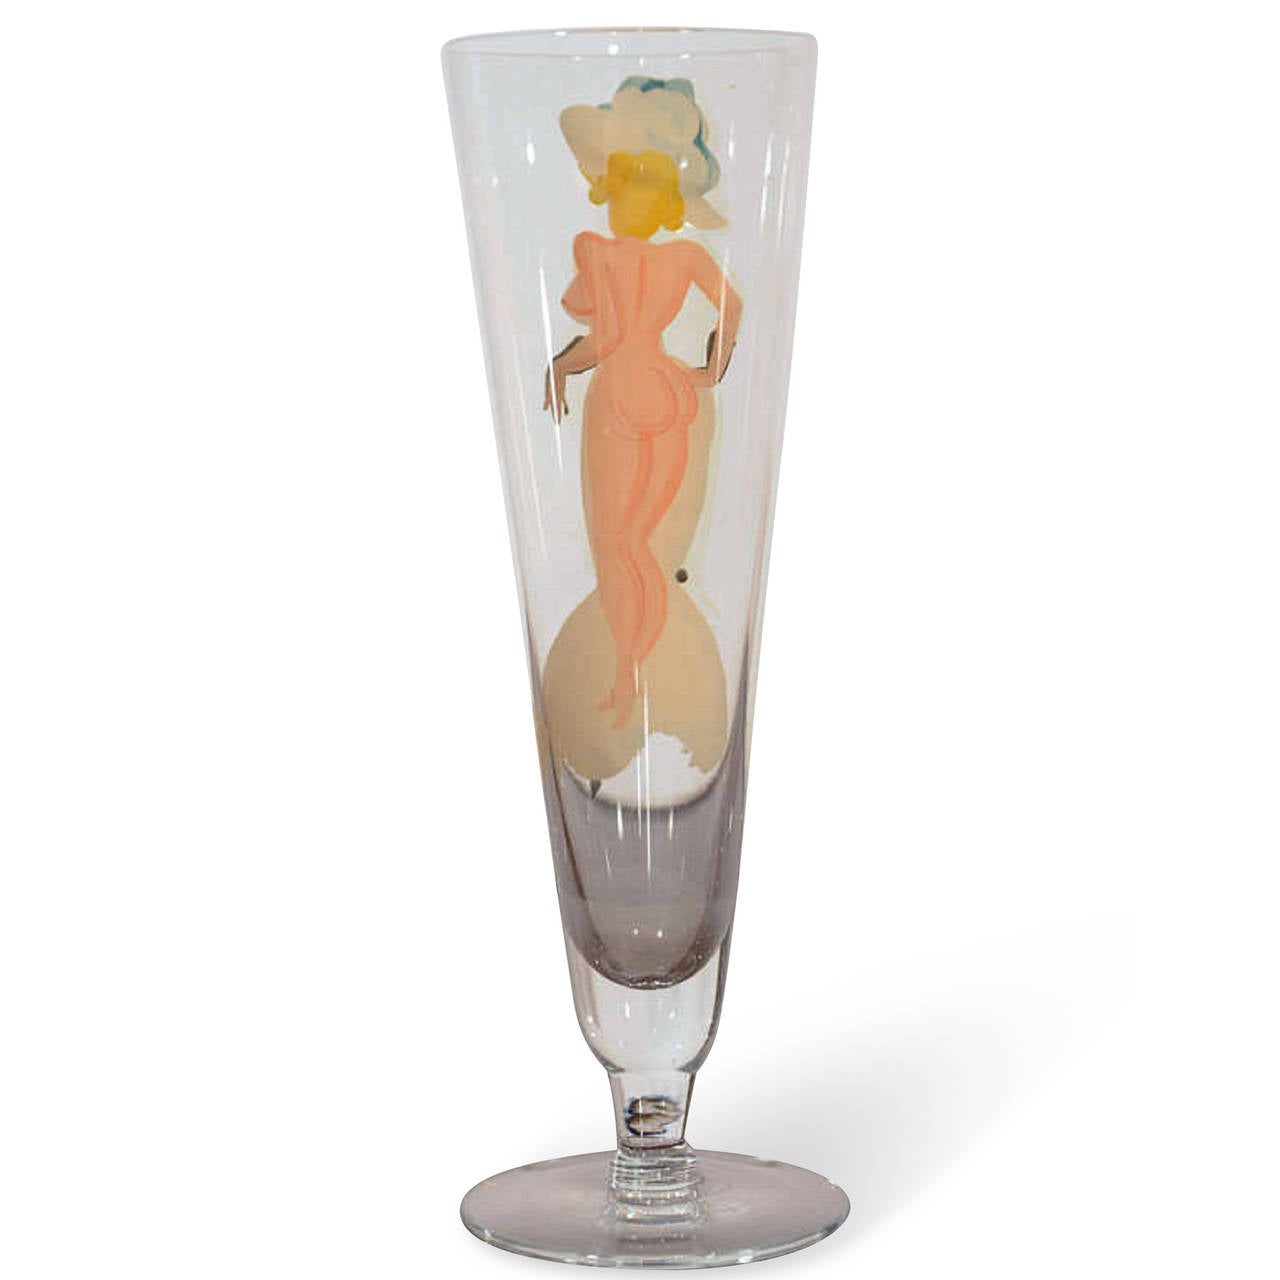 A set of custom-made, hand-painted drinking glasses from the Estate of Doris Duke. The front of the glasses are painted with clothed female figures. From the inside of the glass, the woman is nude(see images). Total of 54 pieces comprising - ten